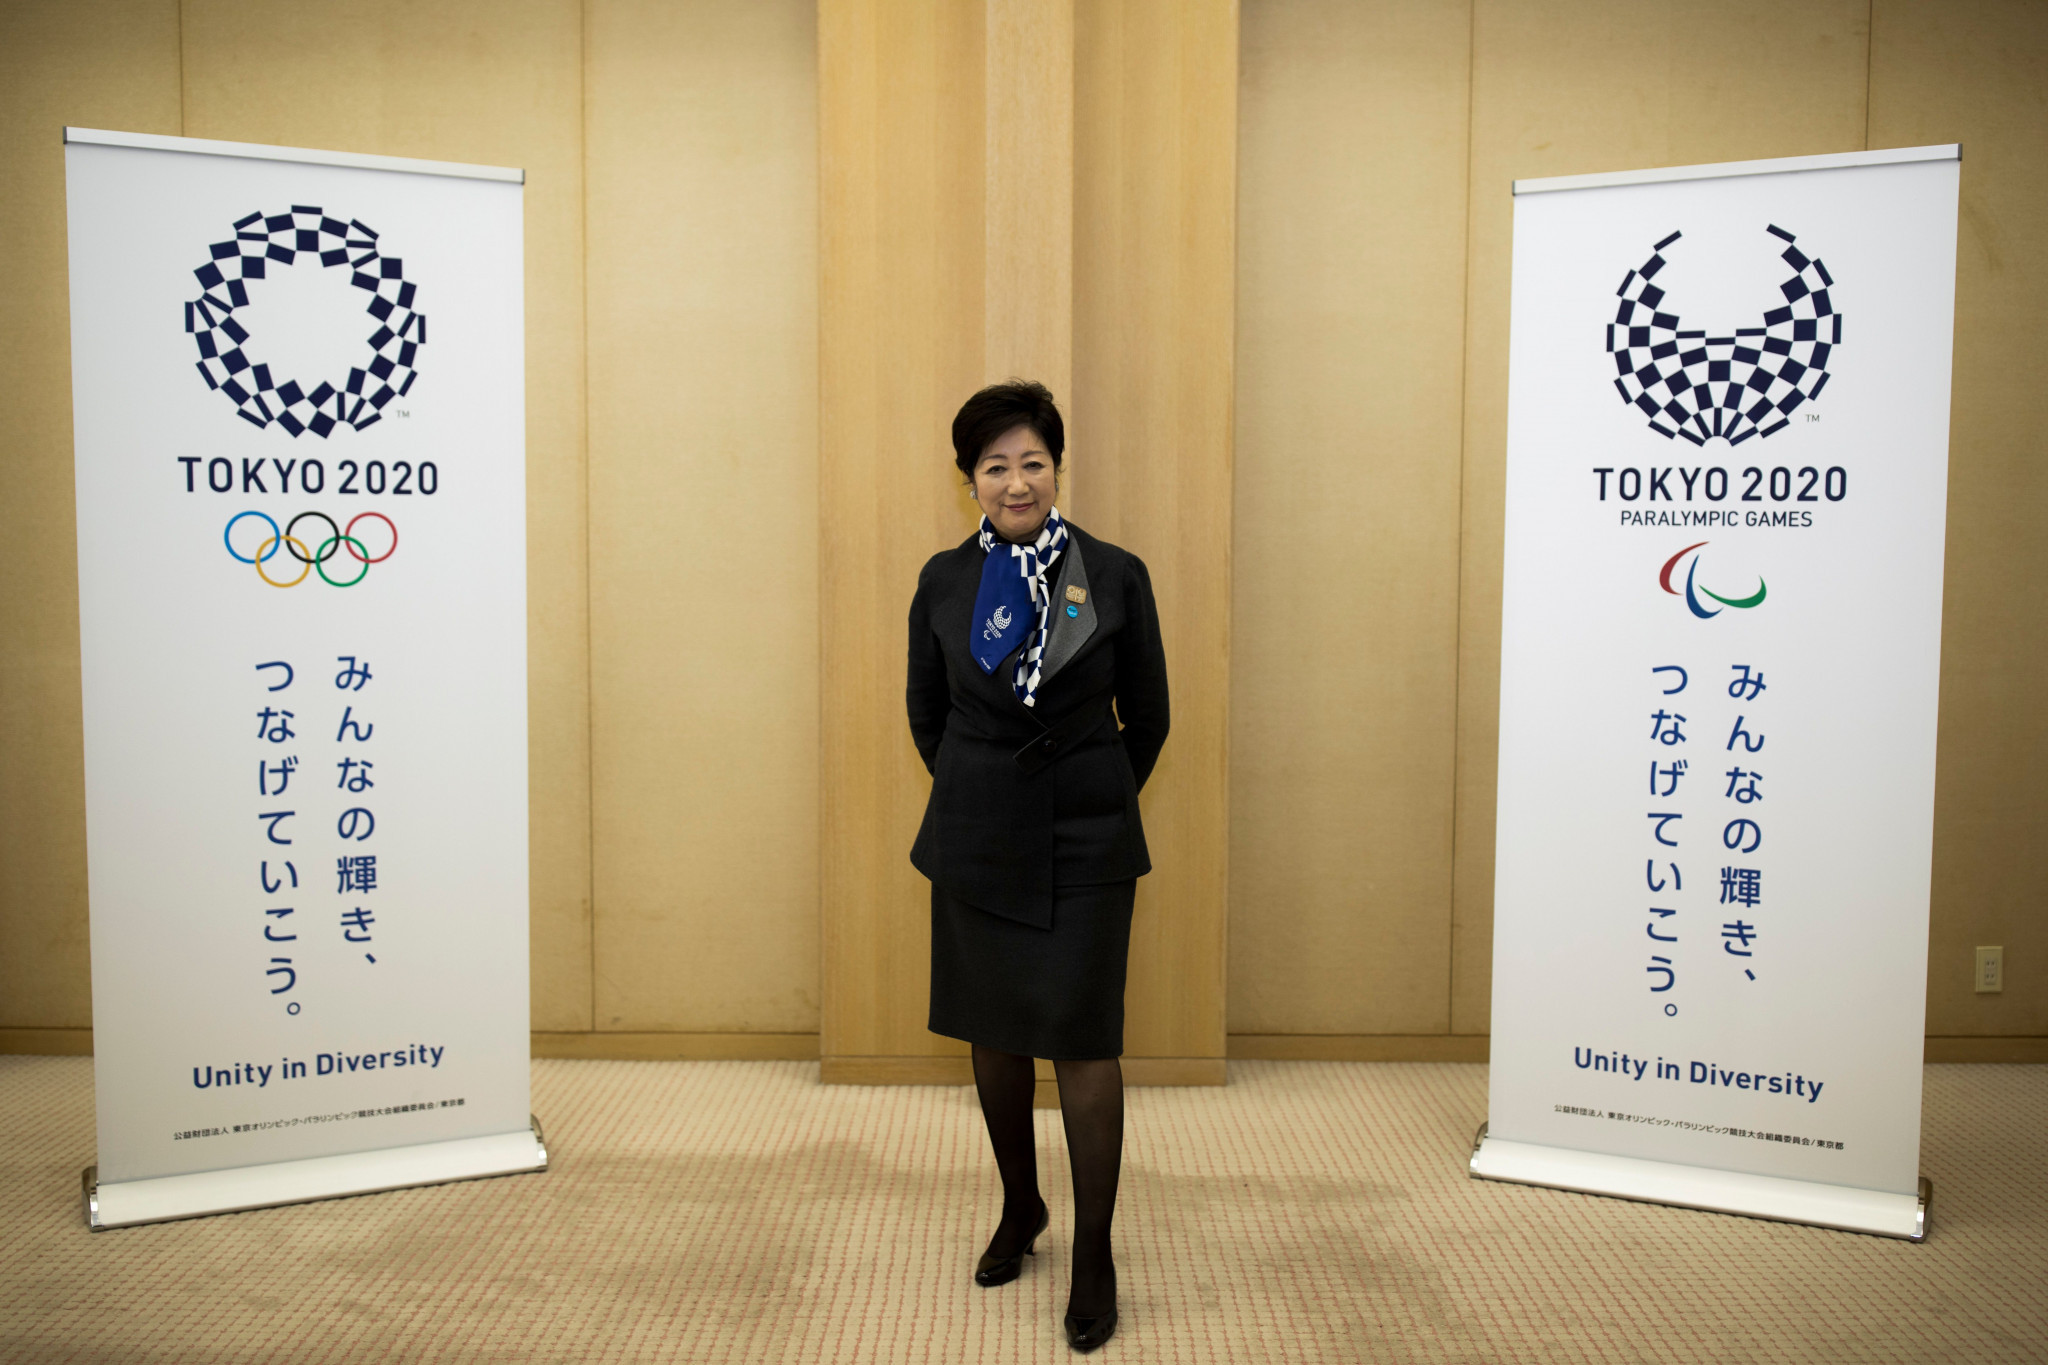 Tokyo 2020 has been laying out its security plans ahead of the Games ©Getty Images